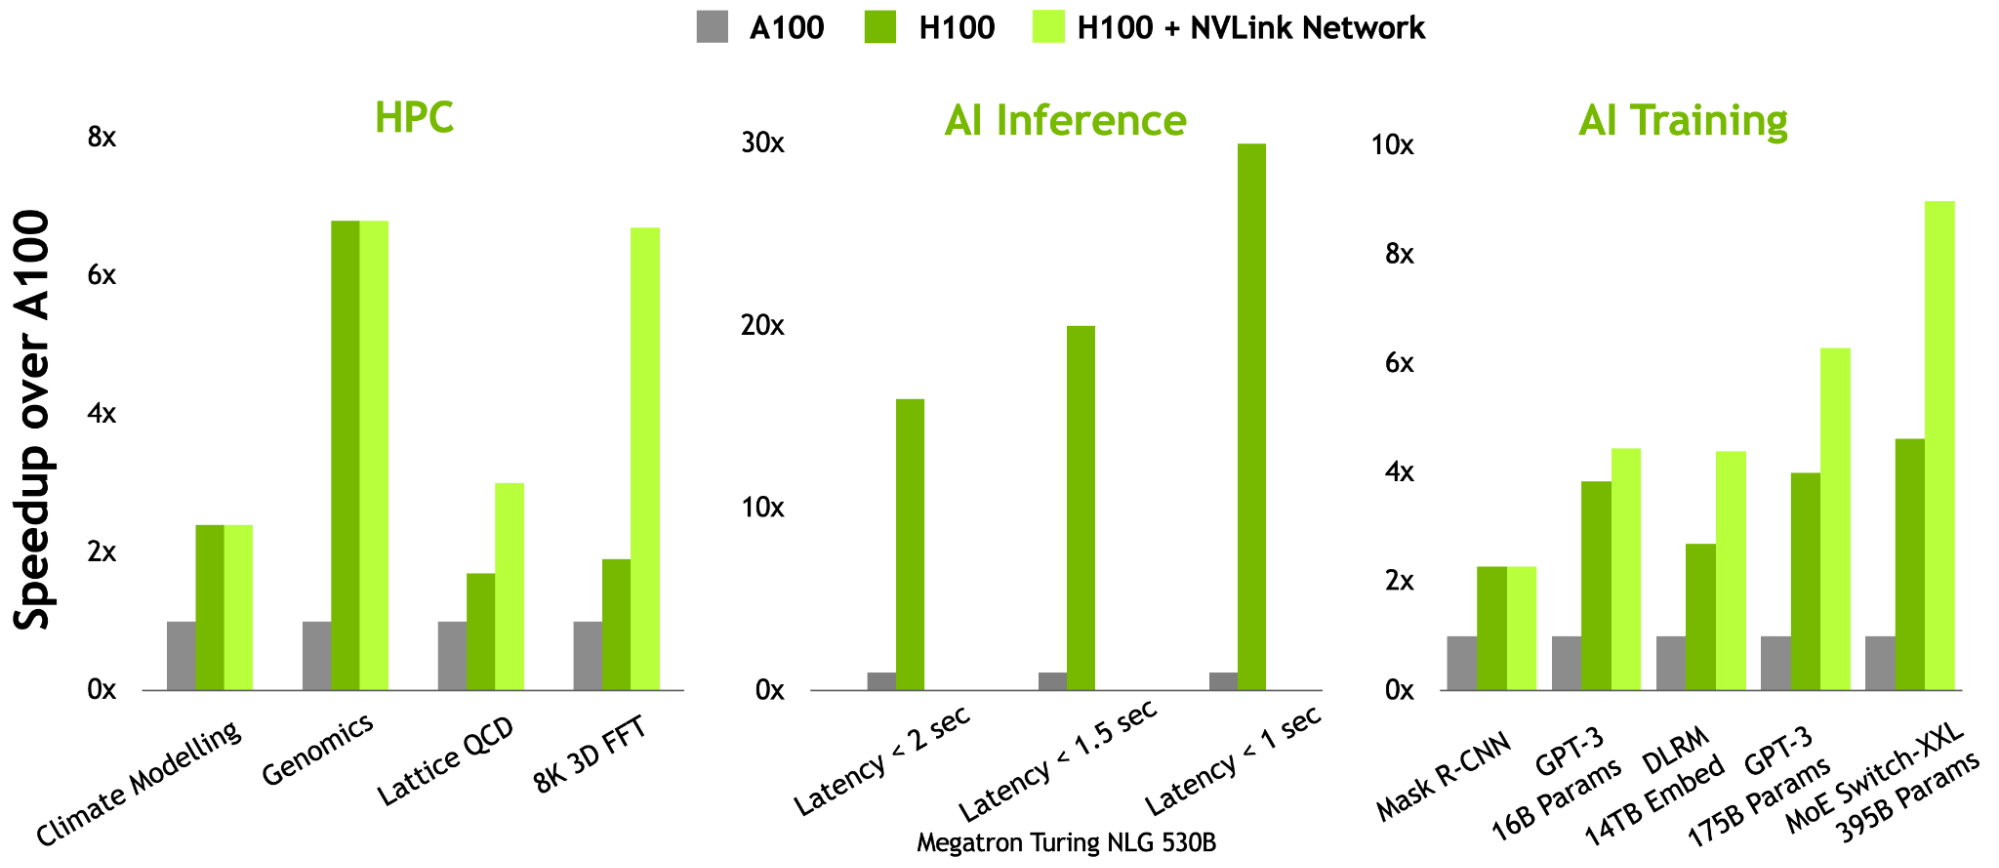 First chart shows performance improvements on HPC applications (climate modeling, genomics, Lattice QCD, or 3D FFT). Second chart shows AI inference latency improvements for Megatron Turing NLG 530B. Third chart shows AI training covering Mask R-CNN, GPT-3 with 16B and 175B parameters, DLRM with 14-TB Embedding tables, and MoE Switch-XXL with 395B parameters.